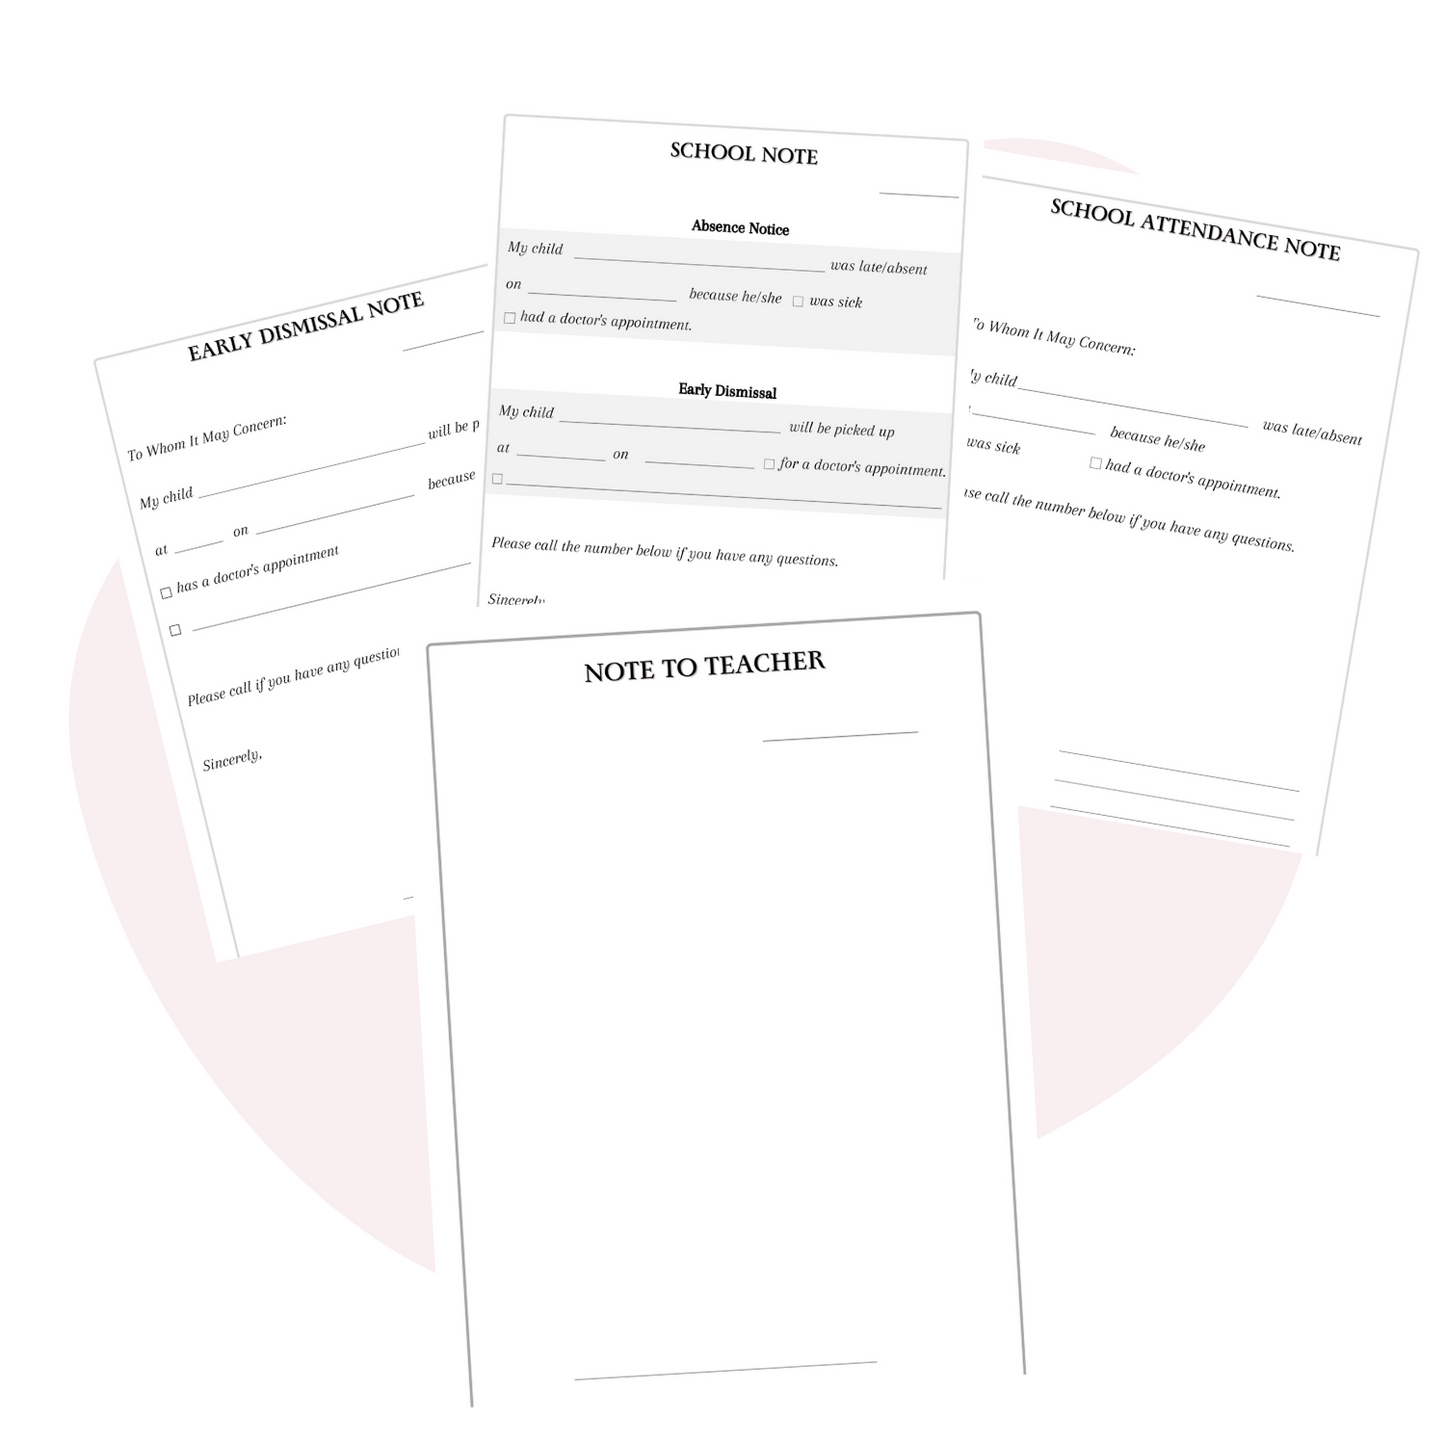 School Absence and Tardiness Notification Templates